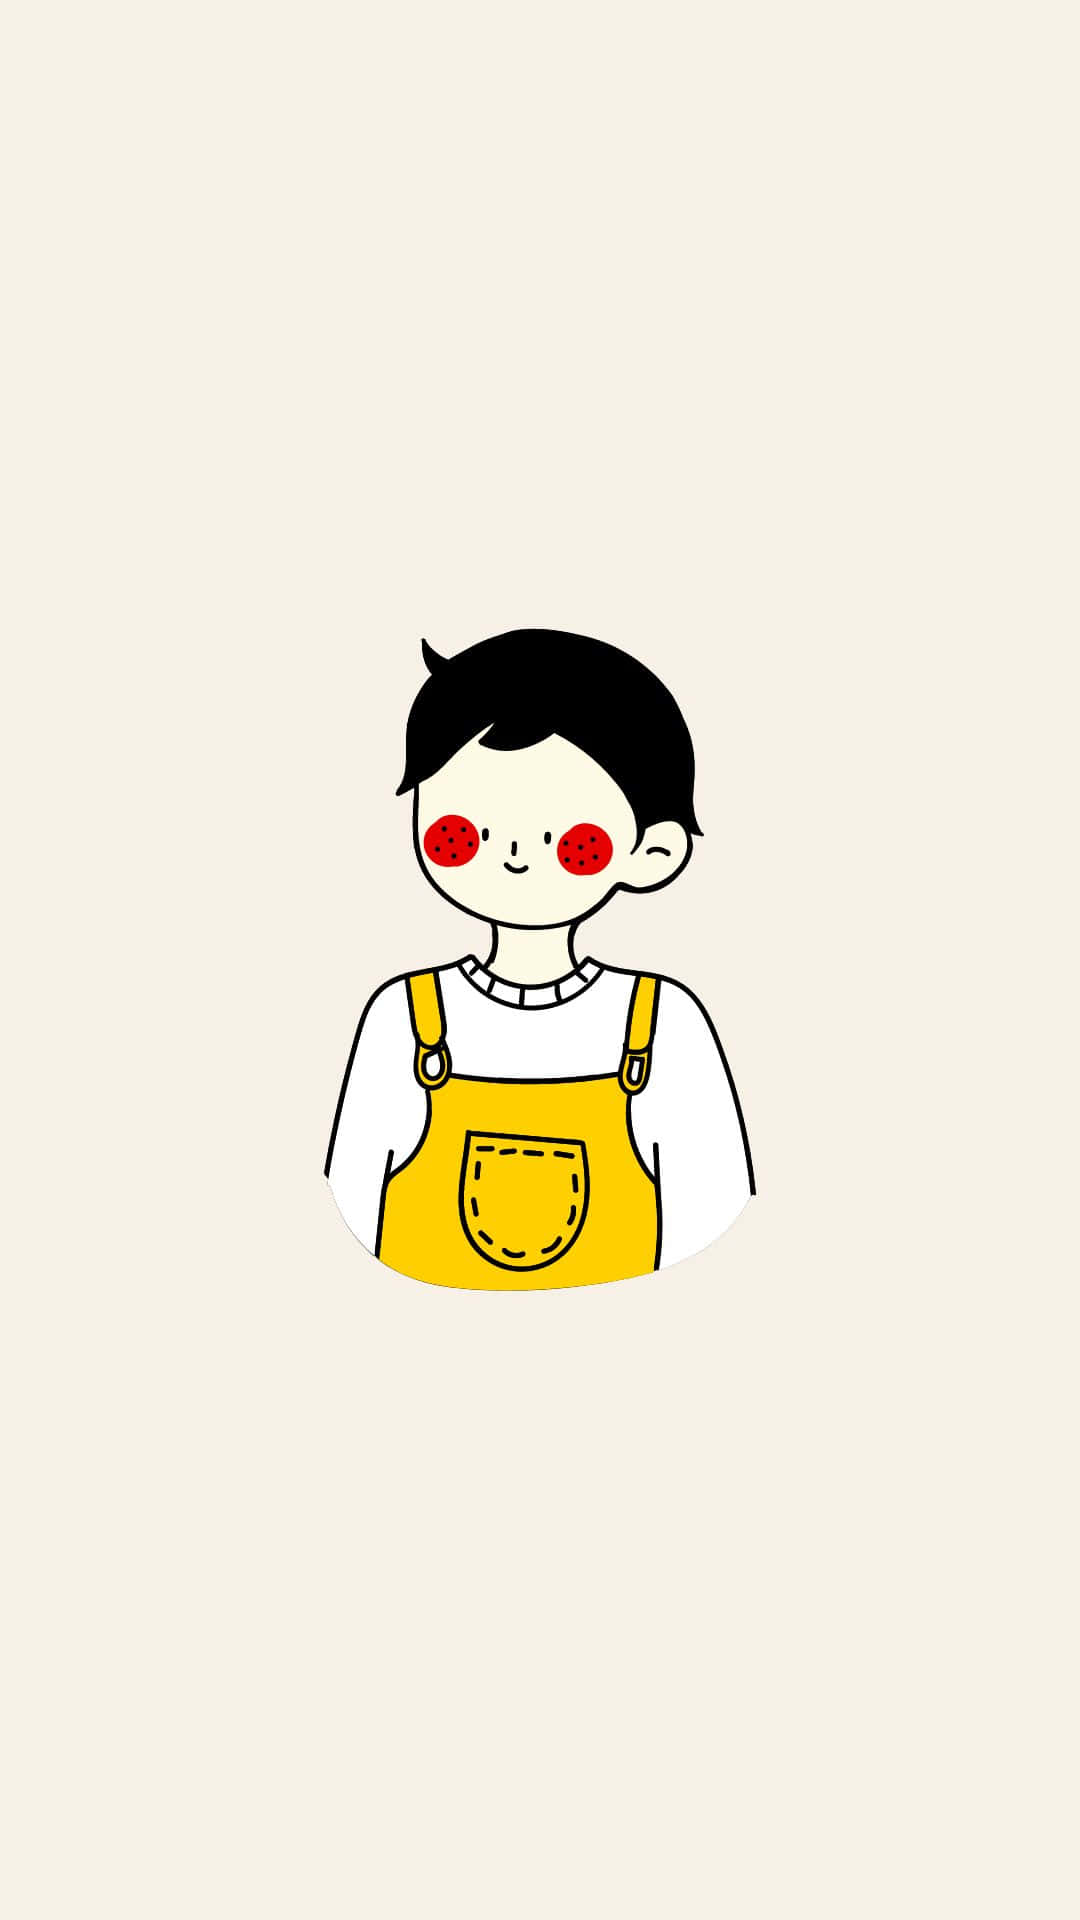 Cool And Stylish Boy Cartoon In Yellow Jumper